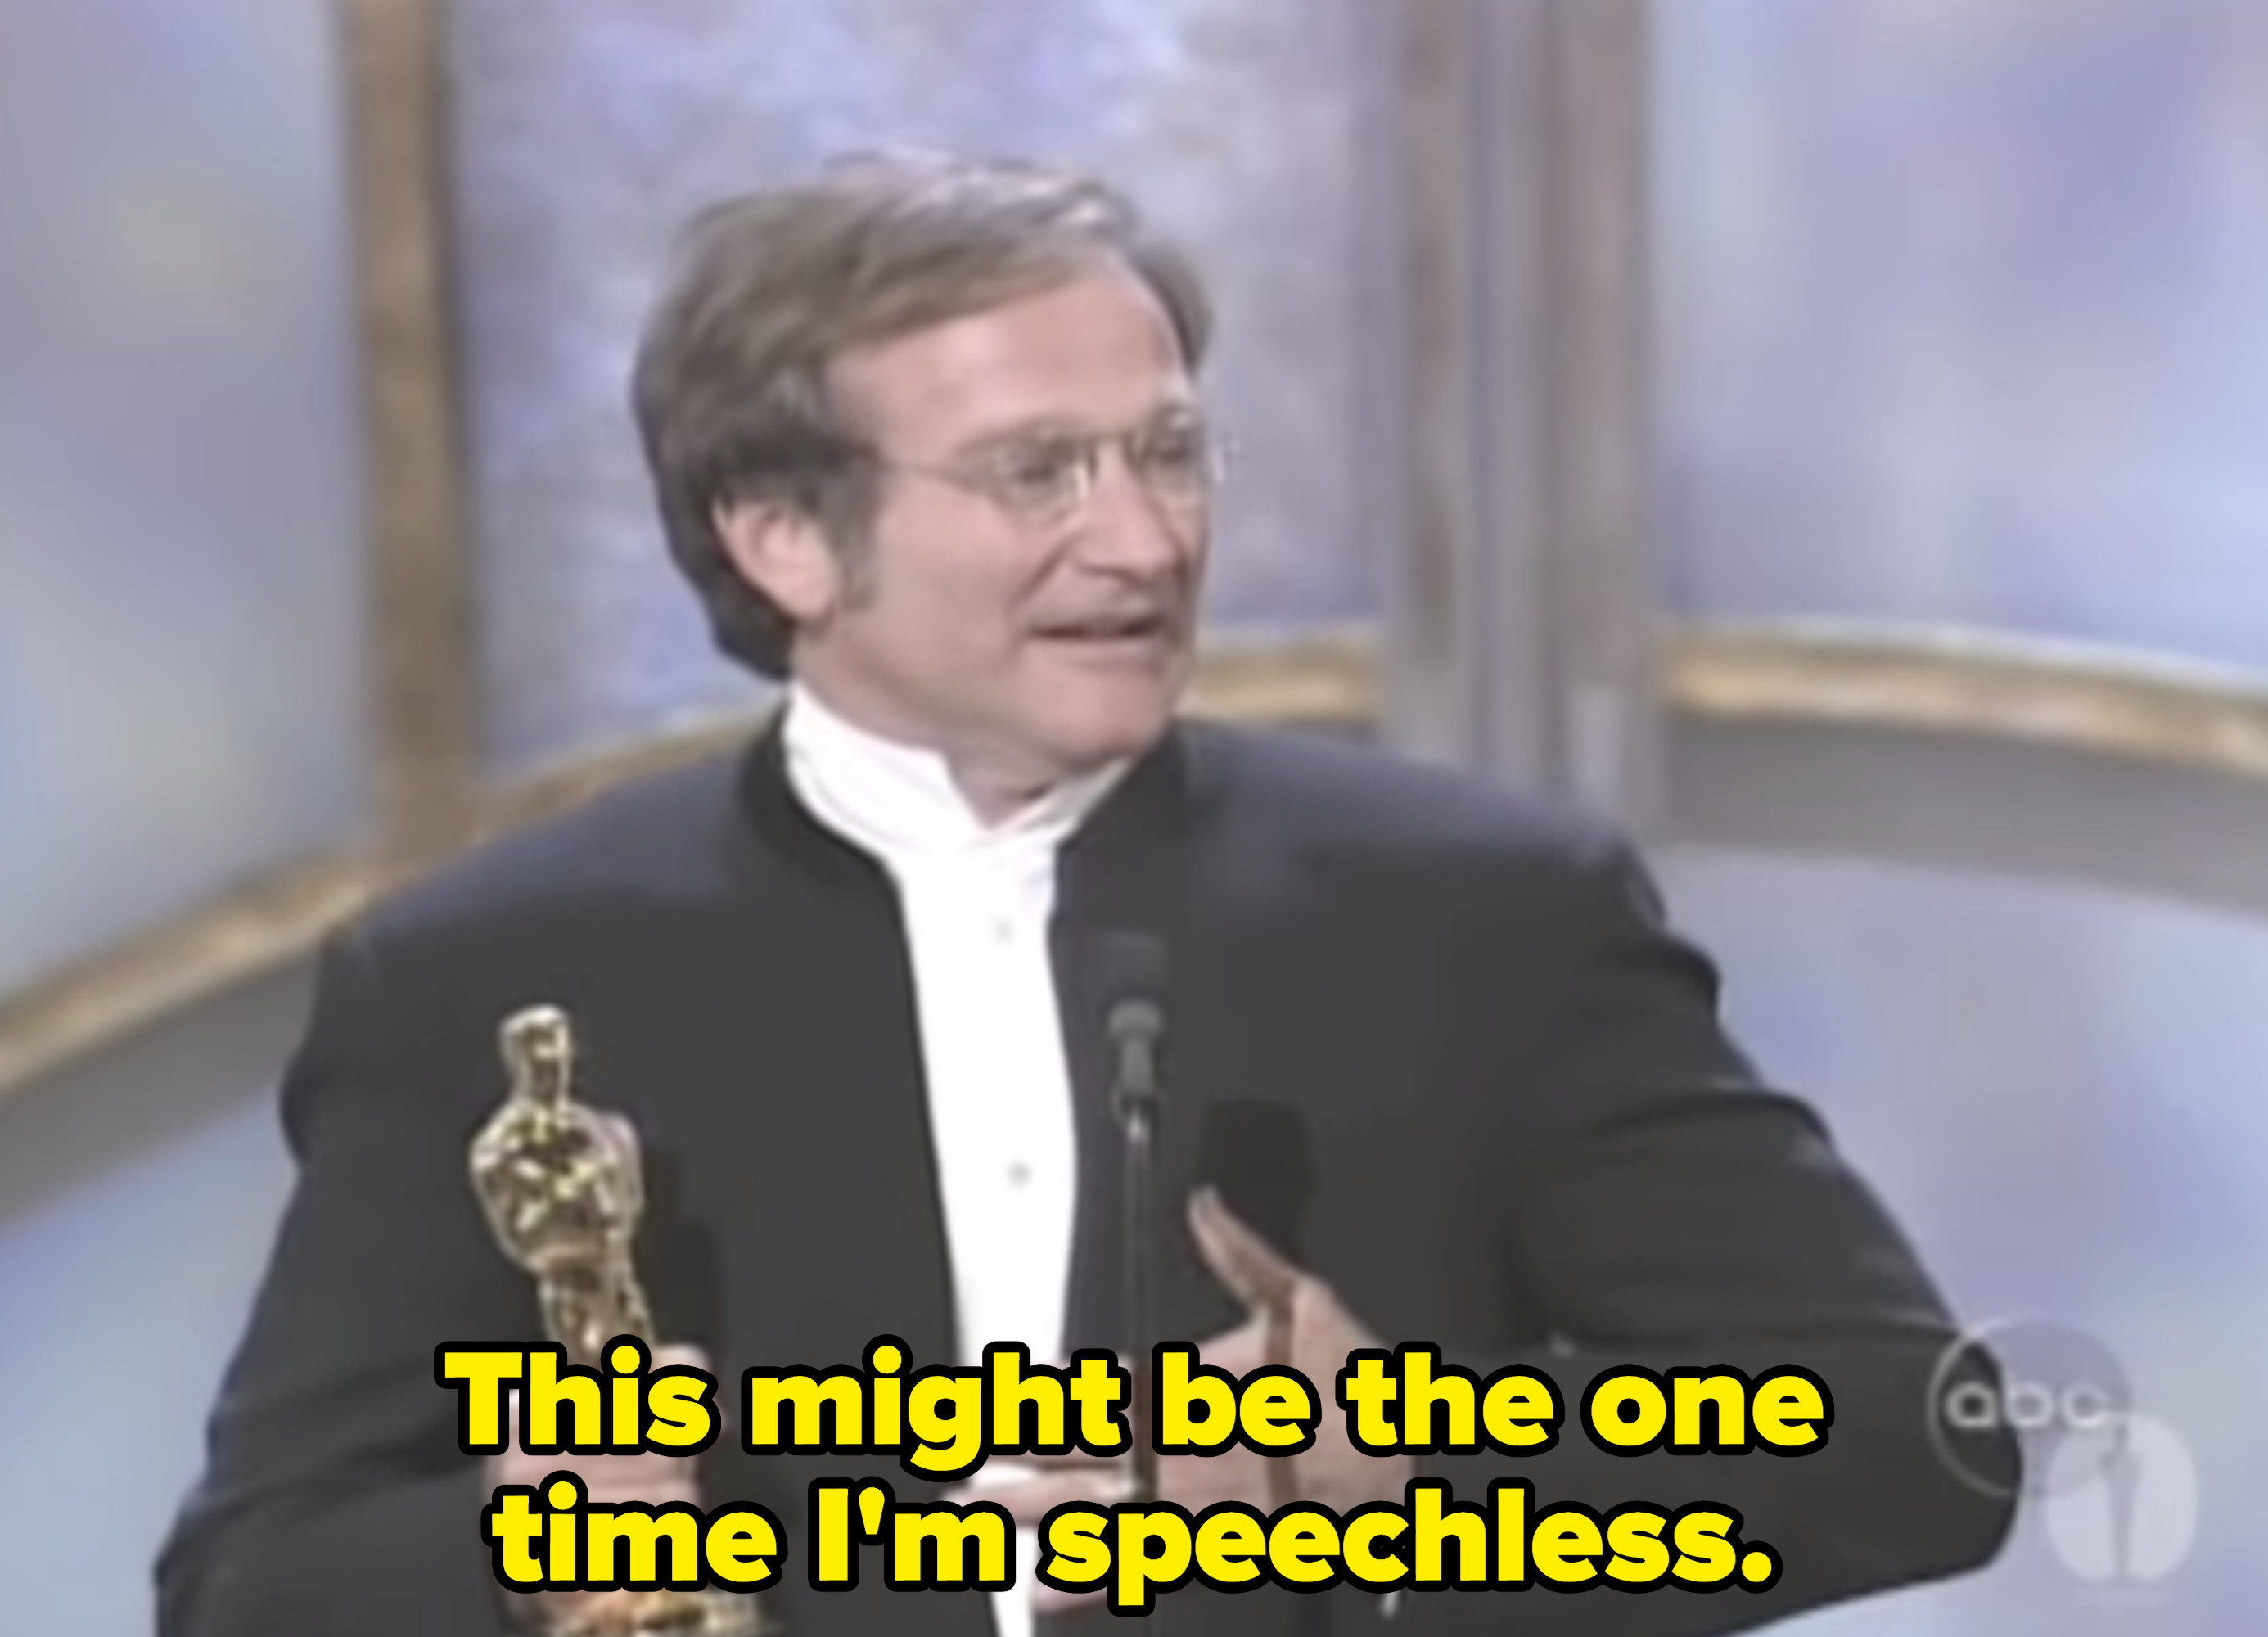 Robin Williams accepting his Academy Award, saying: &quot;This might be the one time I&#x27;m speechless&quot;